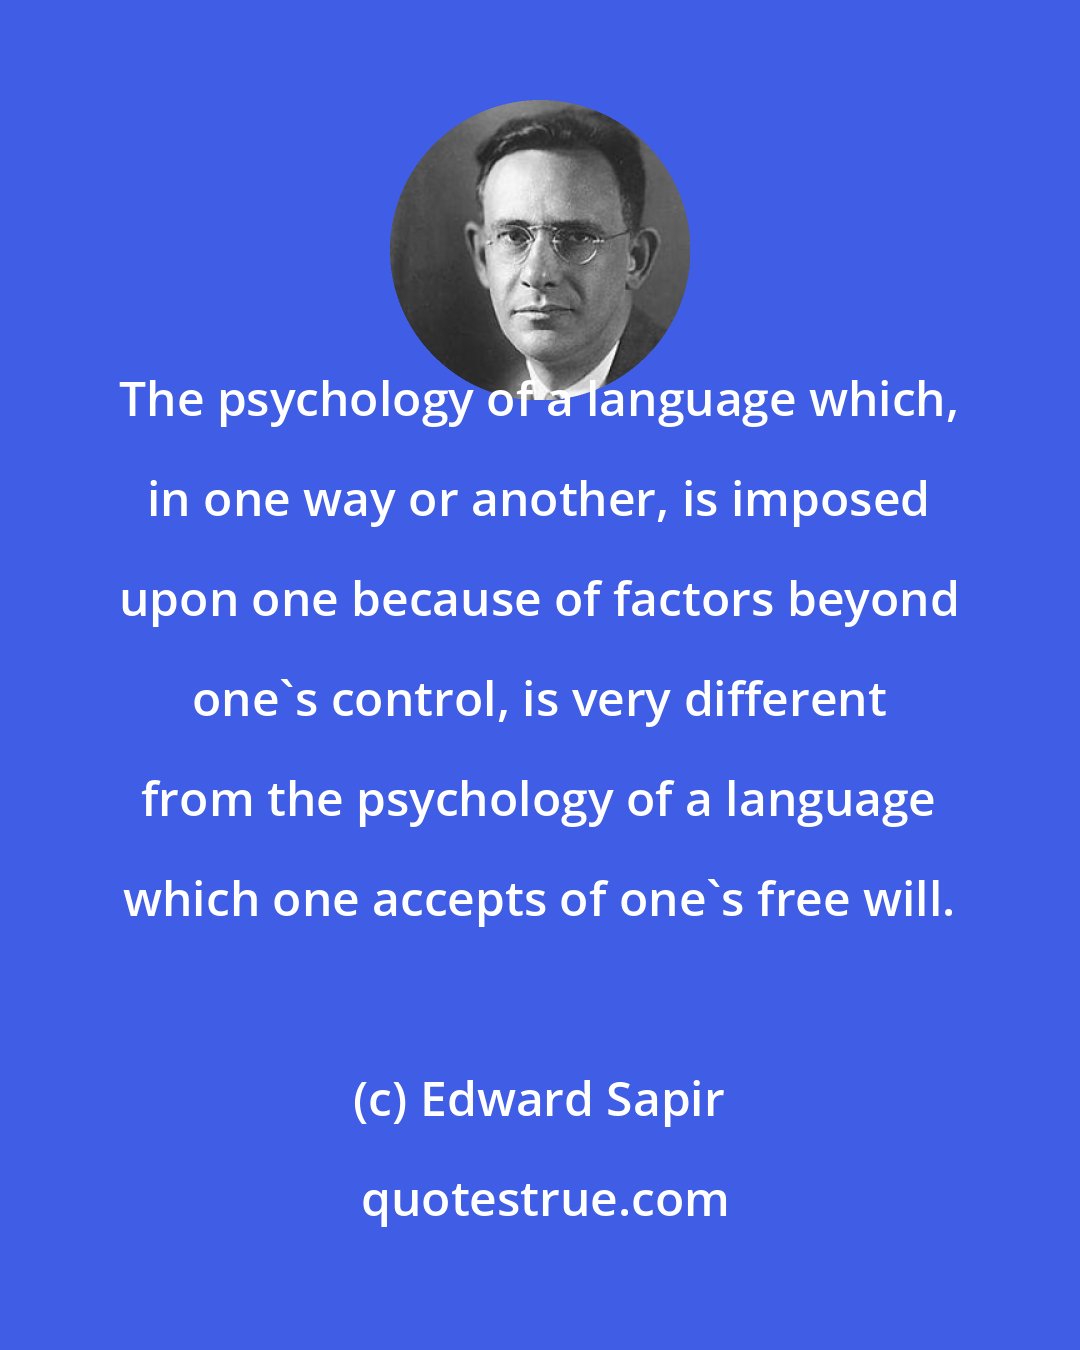 Edward Sapir: The psychology of a language which, in one way or another, is imposed upon one because of factors beyond one's control, is very different from the psychology of a language which one accepts of one's free will.